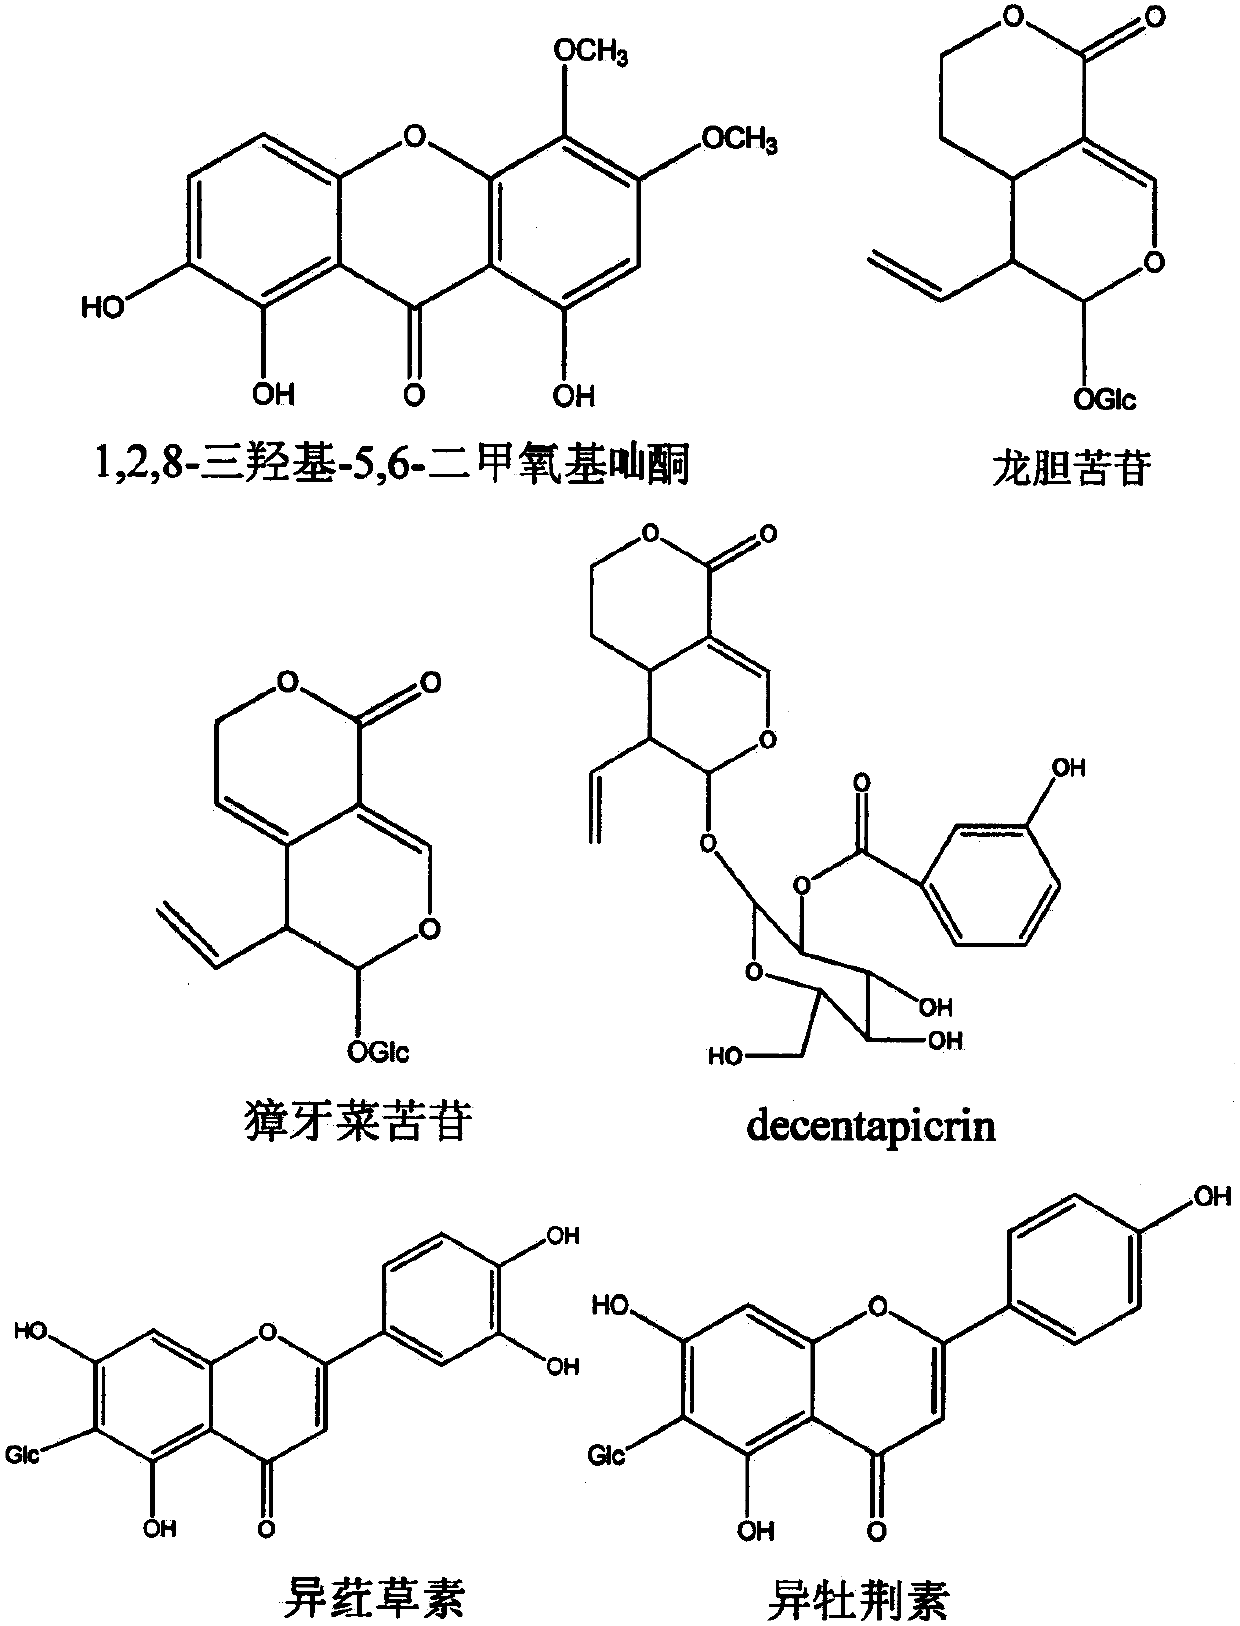 A kind of pseudogentiana acupoints extract for treating arrhythmia and its preparation method and application